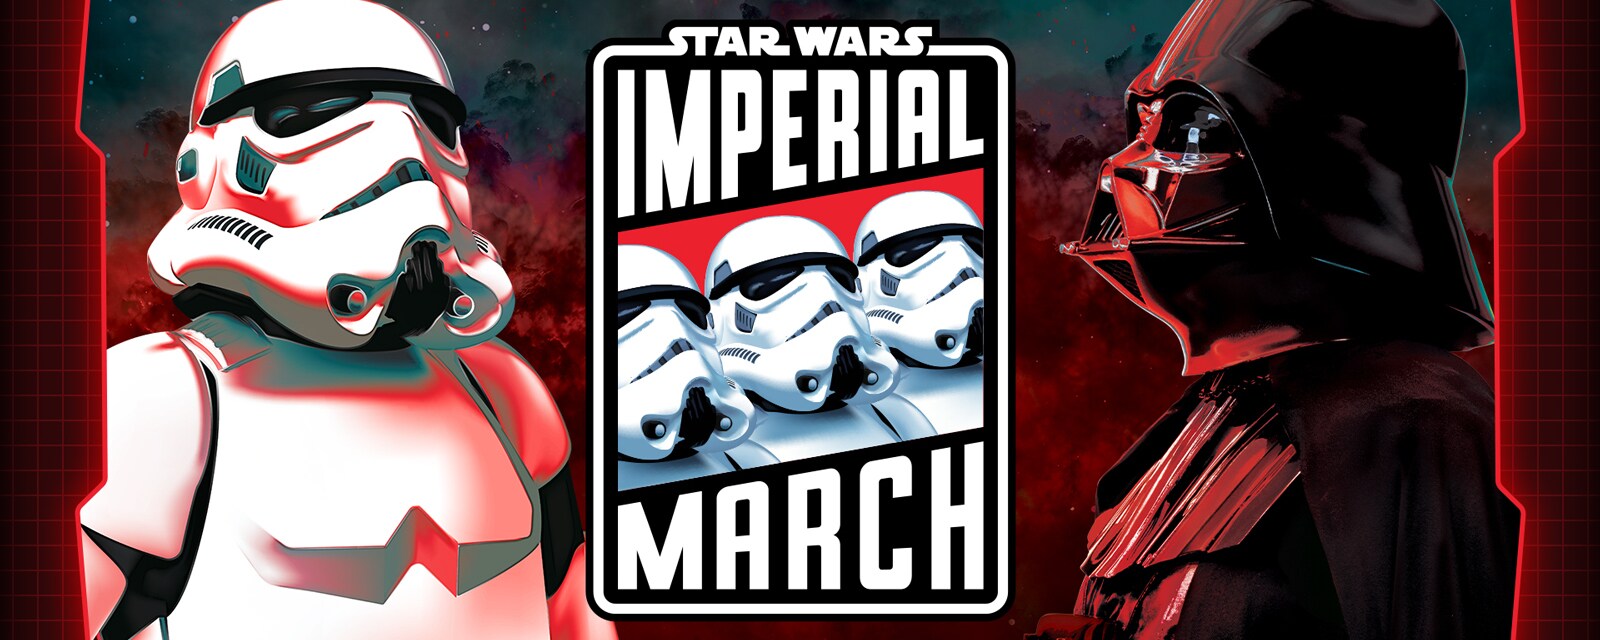 “Imperial March” product program key art featuring stormtroopers and Darth Vader.